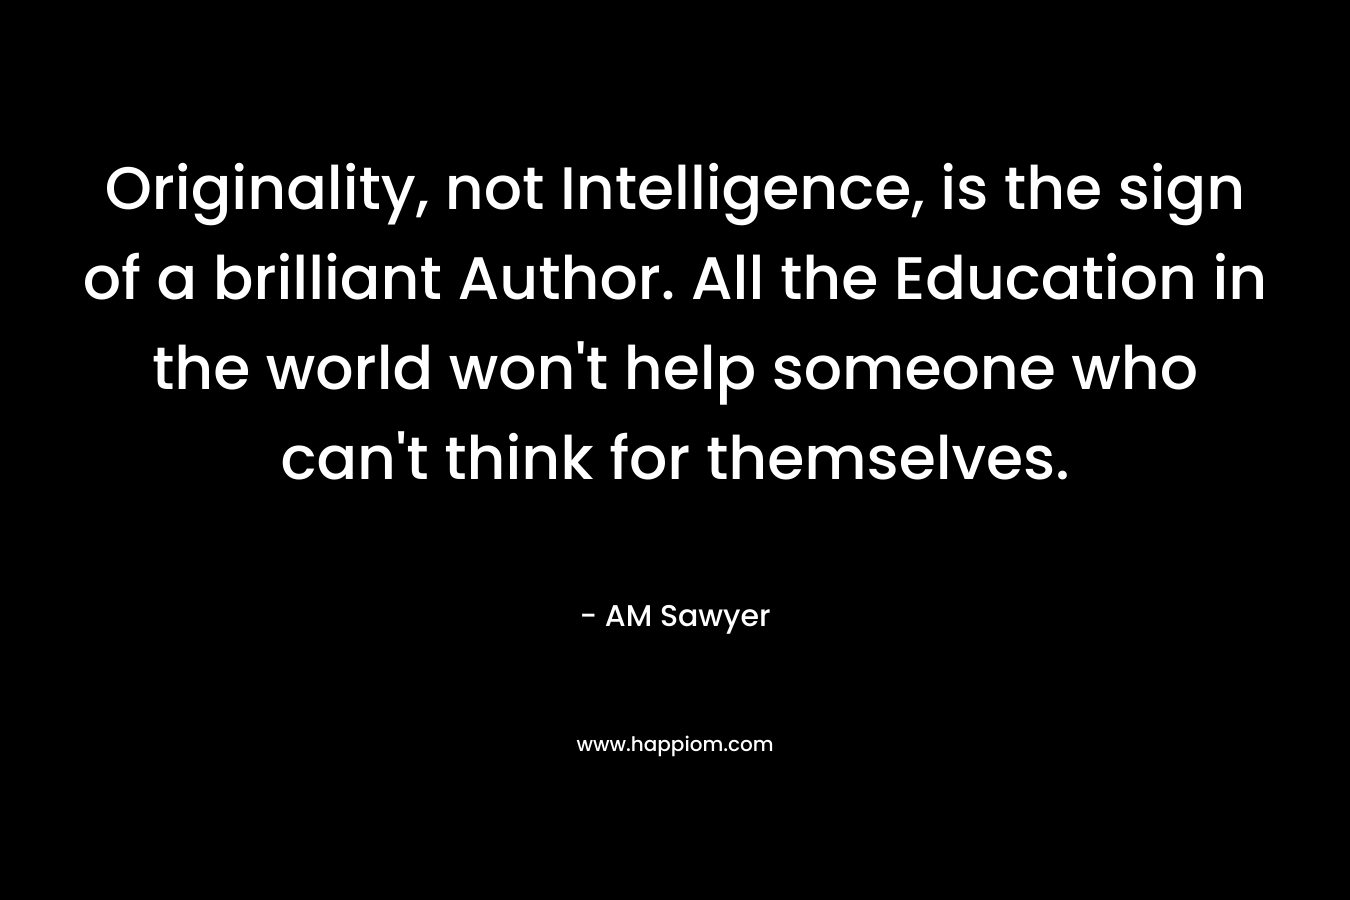 Originality, not Intelligence, is the sign of a brilliant Author. All the Education in the world won't help someone who can't think for themselves.